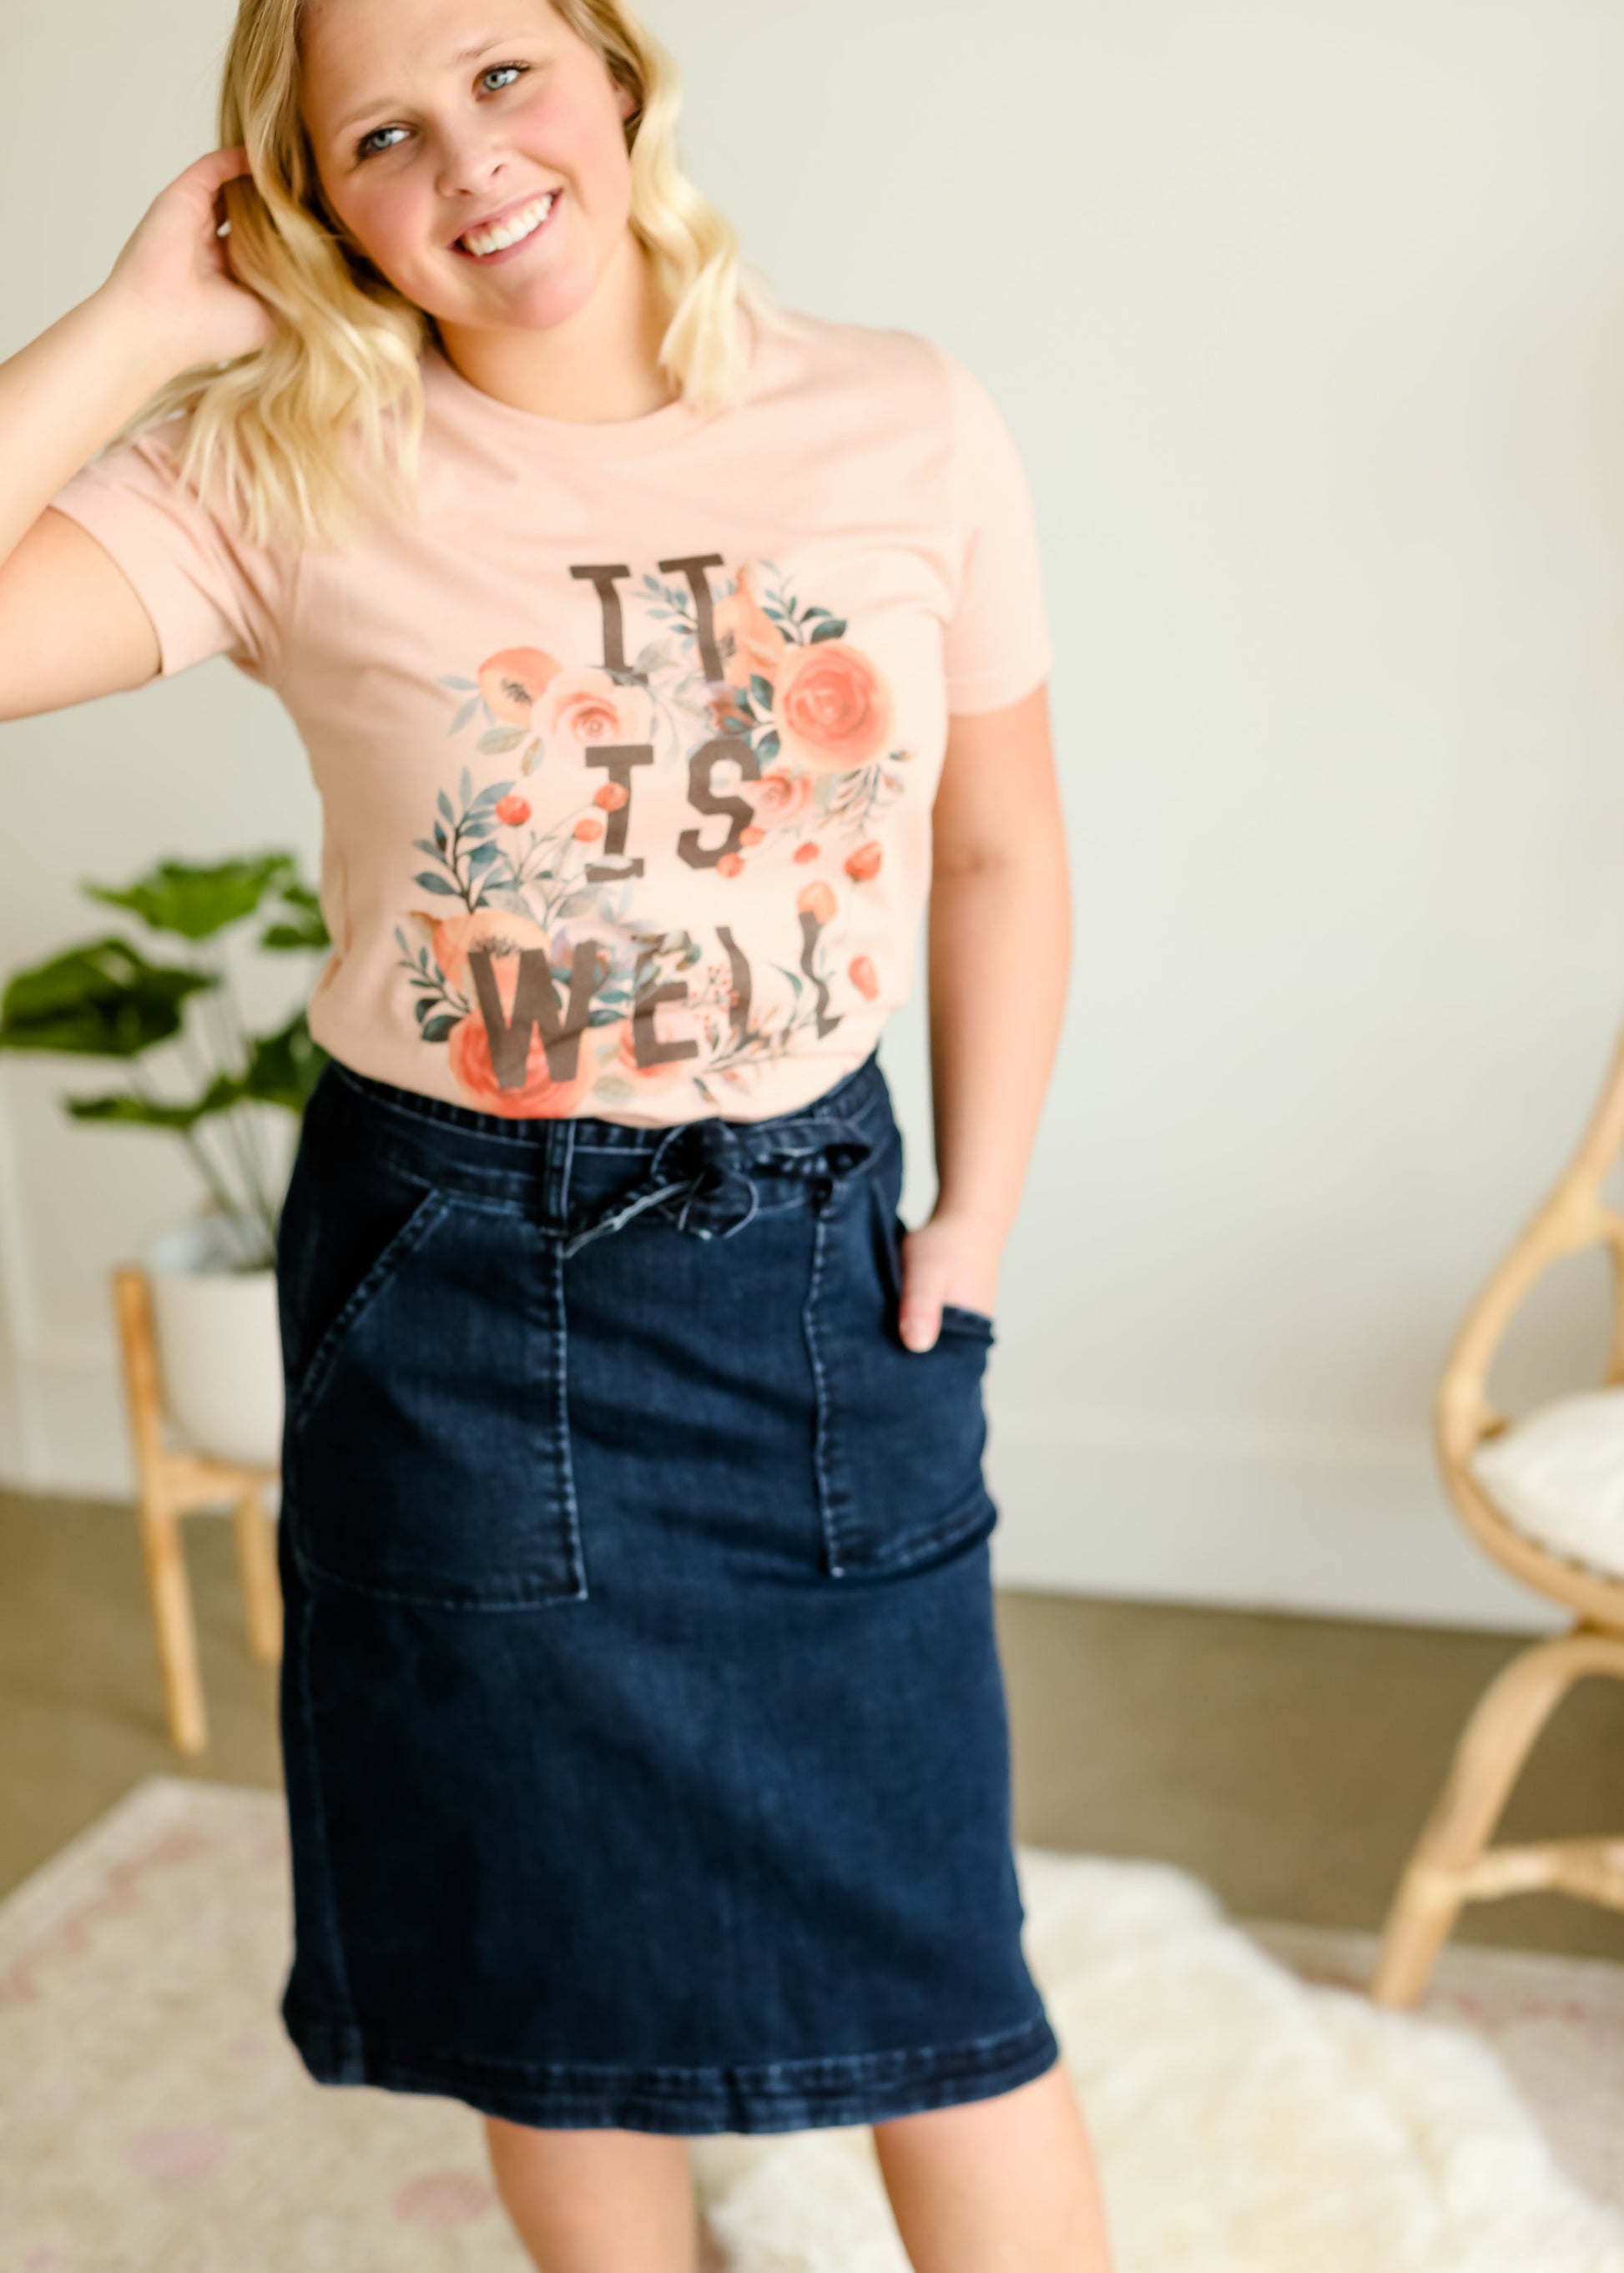 It is Well Floral Tee - FINAL SALE Tops